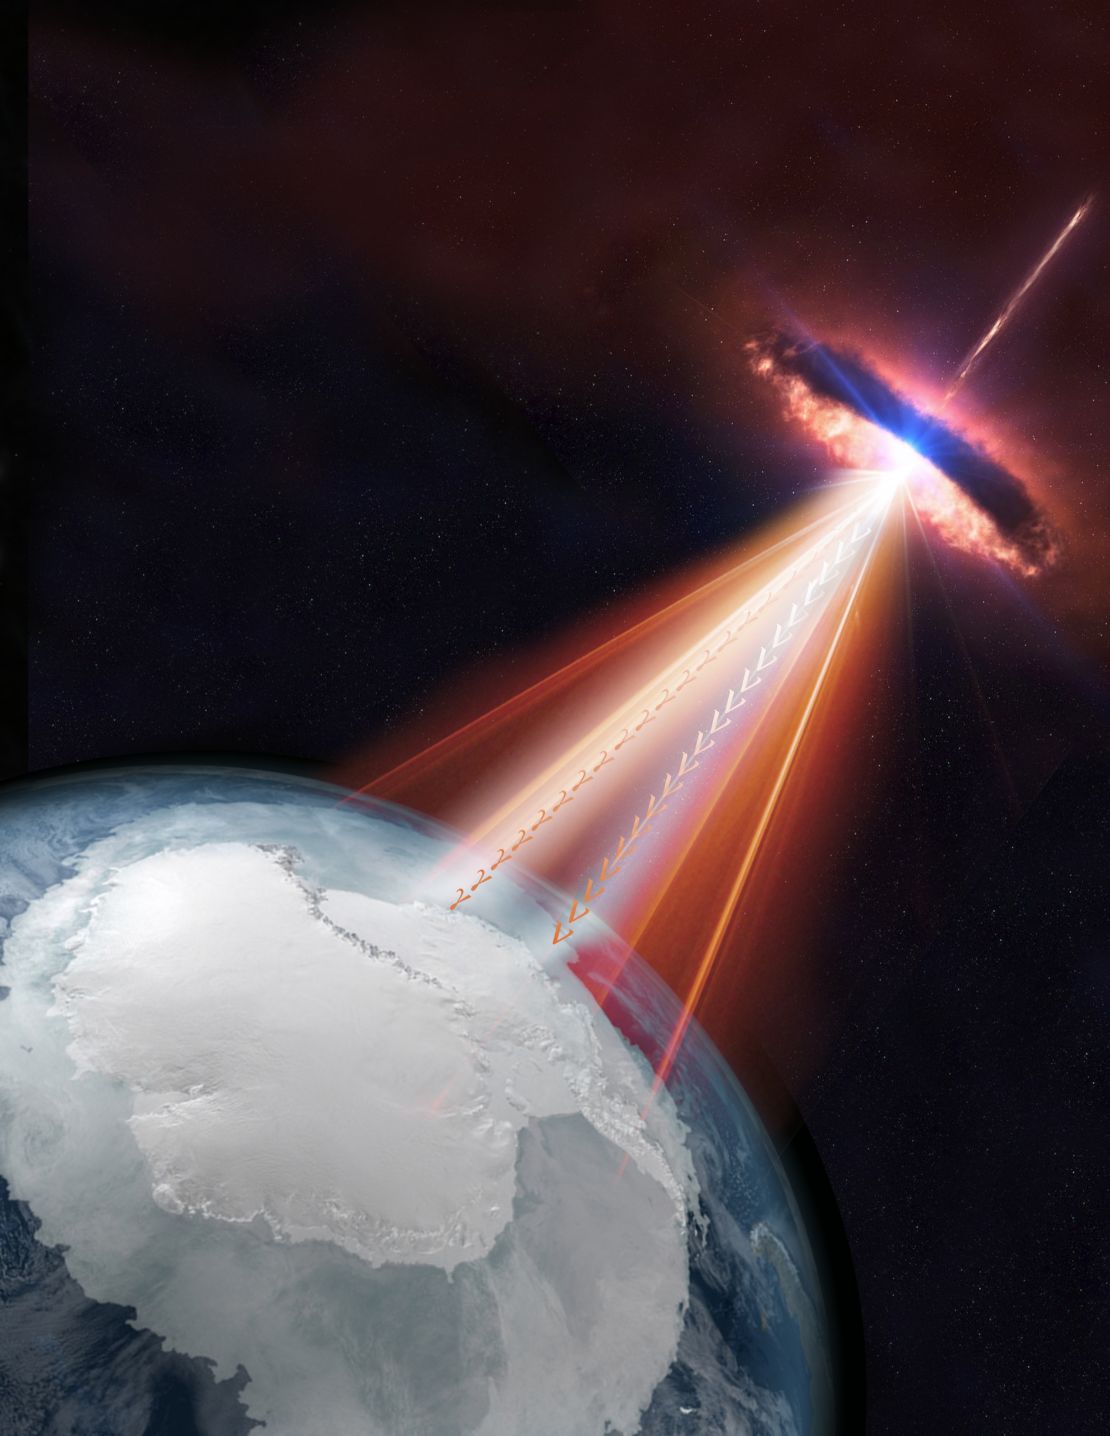 Blazars are a type of active galaxy with one of its jets pointing toward us. In this artistic rendering, a blazar emits both neutrinos and gamma rays could be detected by the IceCube Neutrino Observatory as well as by other telescopes on Earth and in space. 